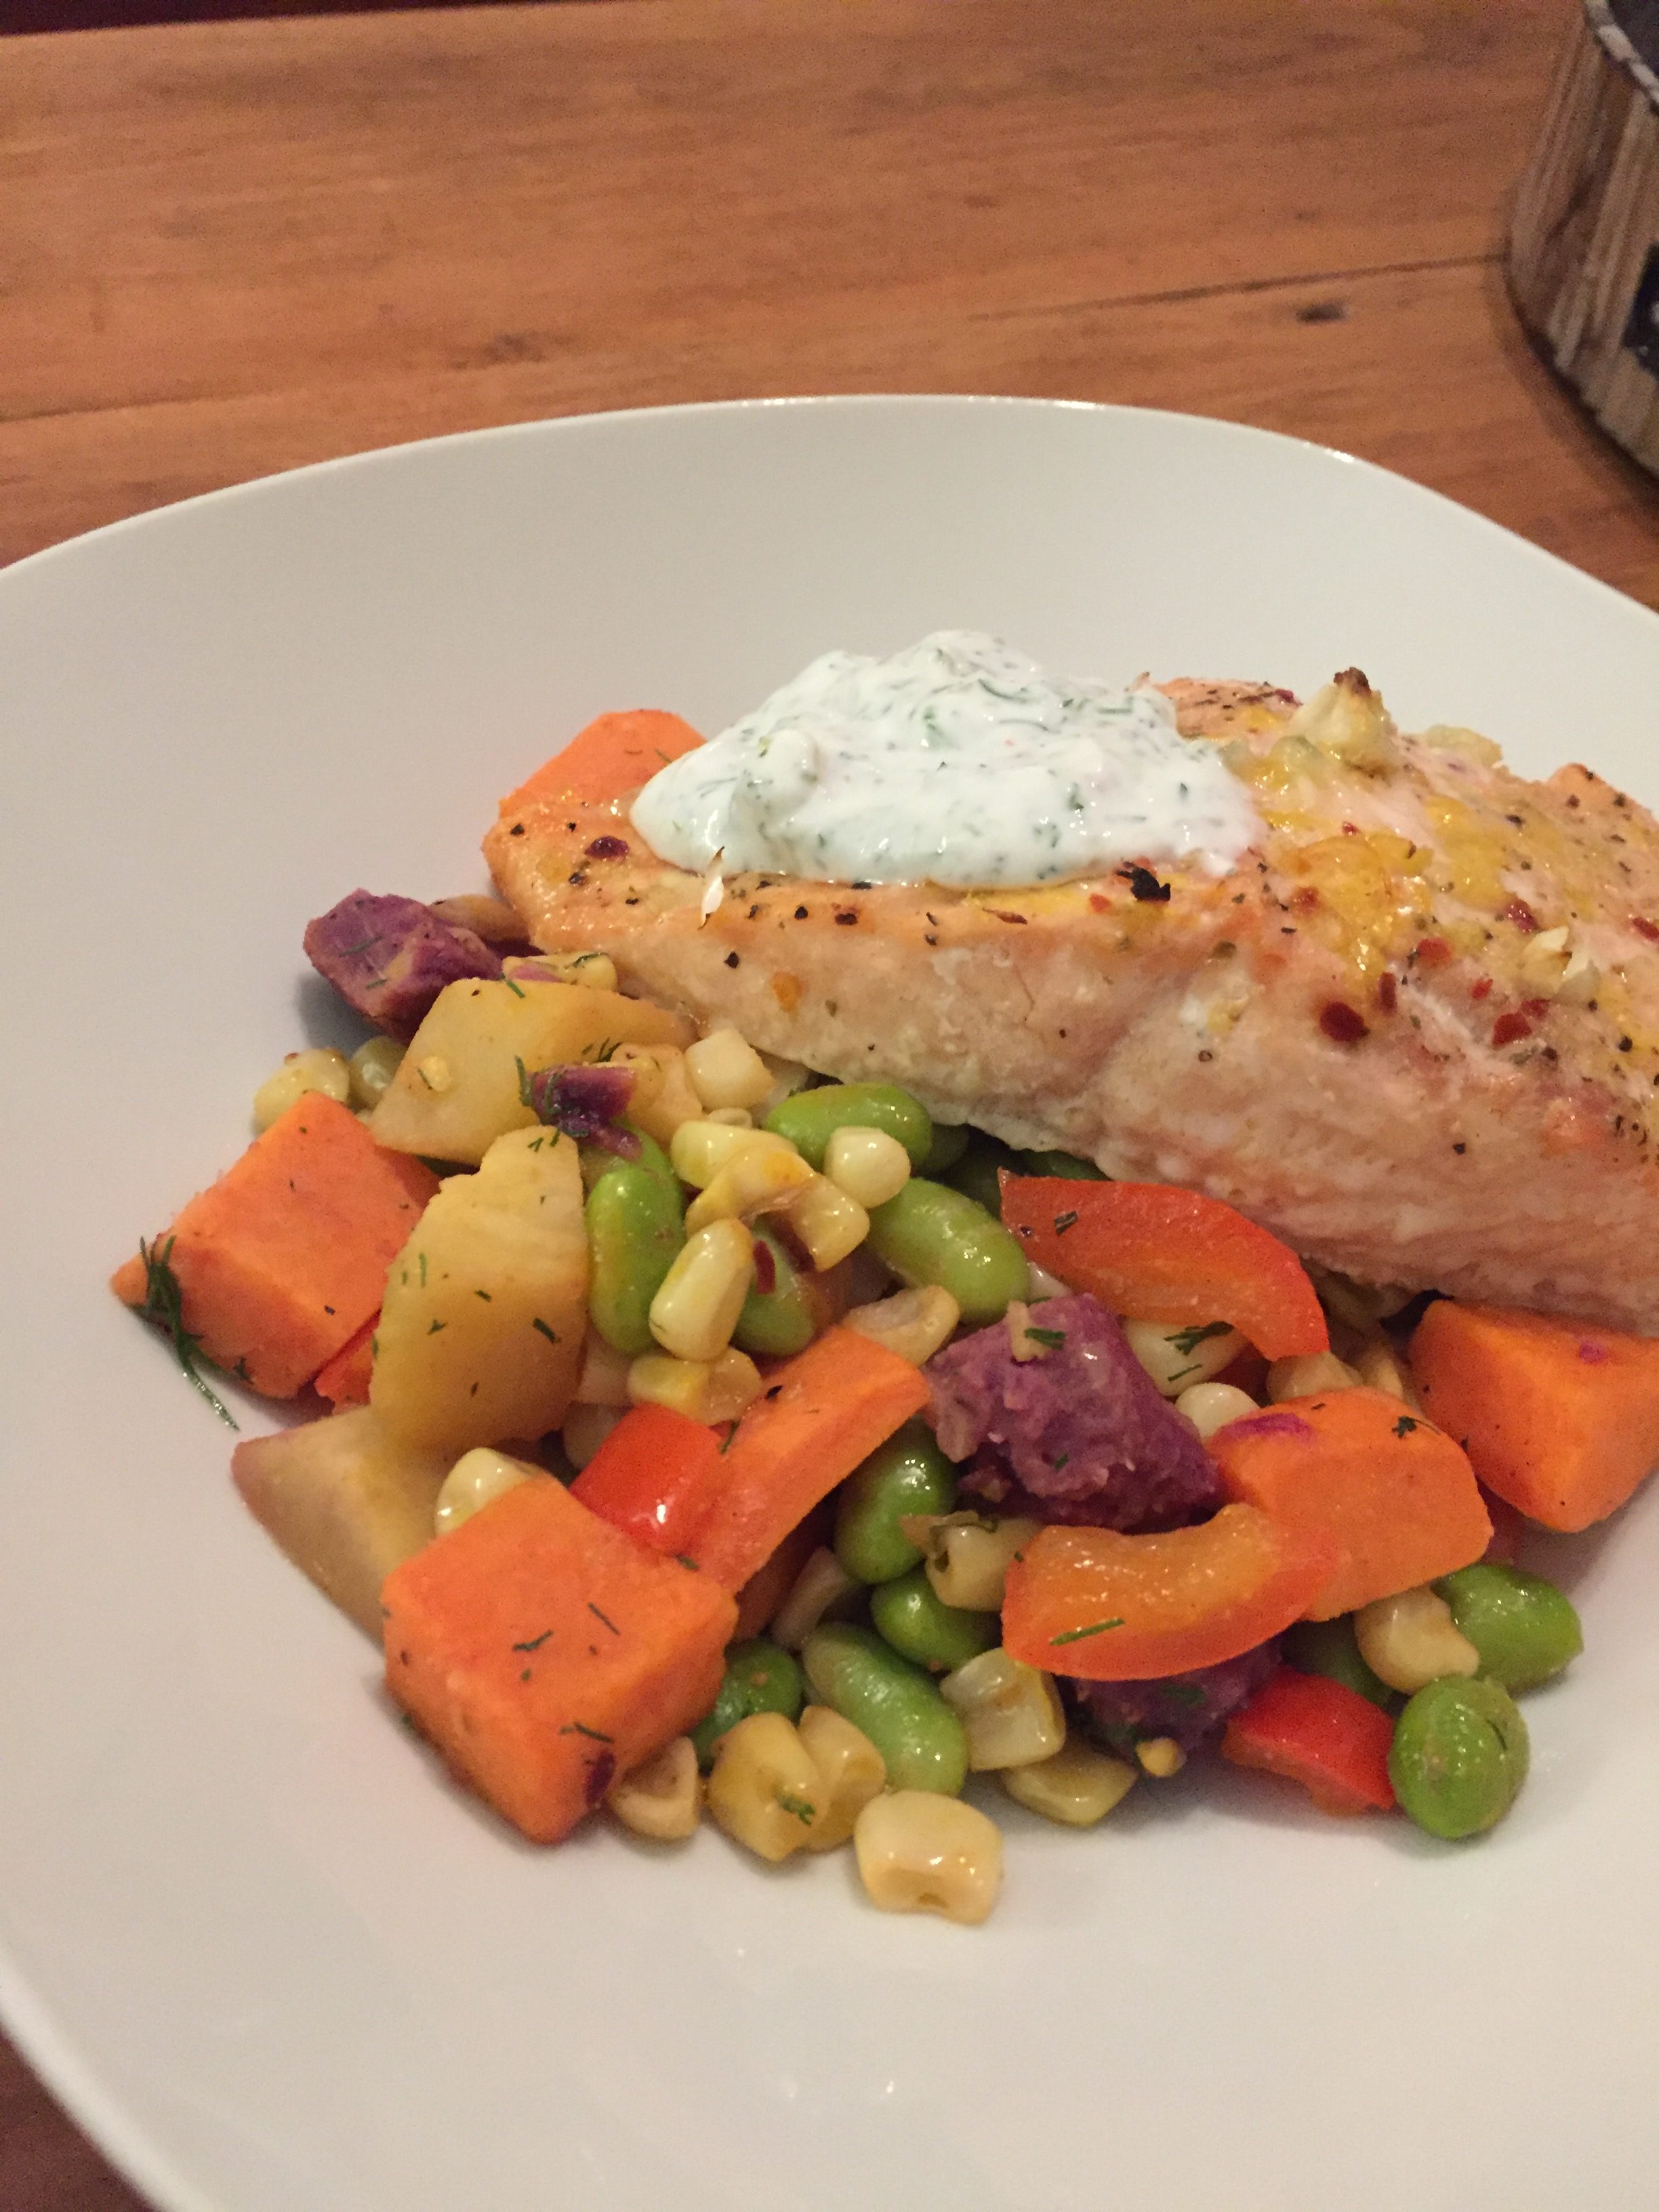 Roasted Salmon with Edamame Succotash and Herb Dill Sauce